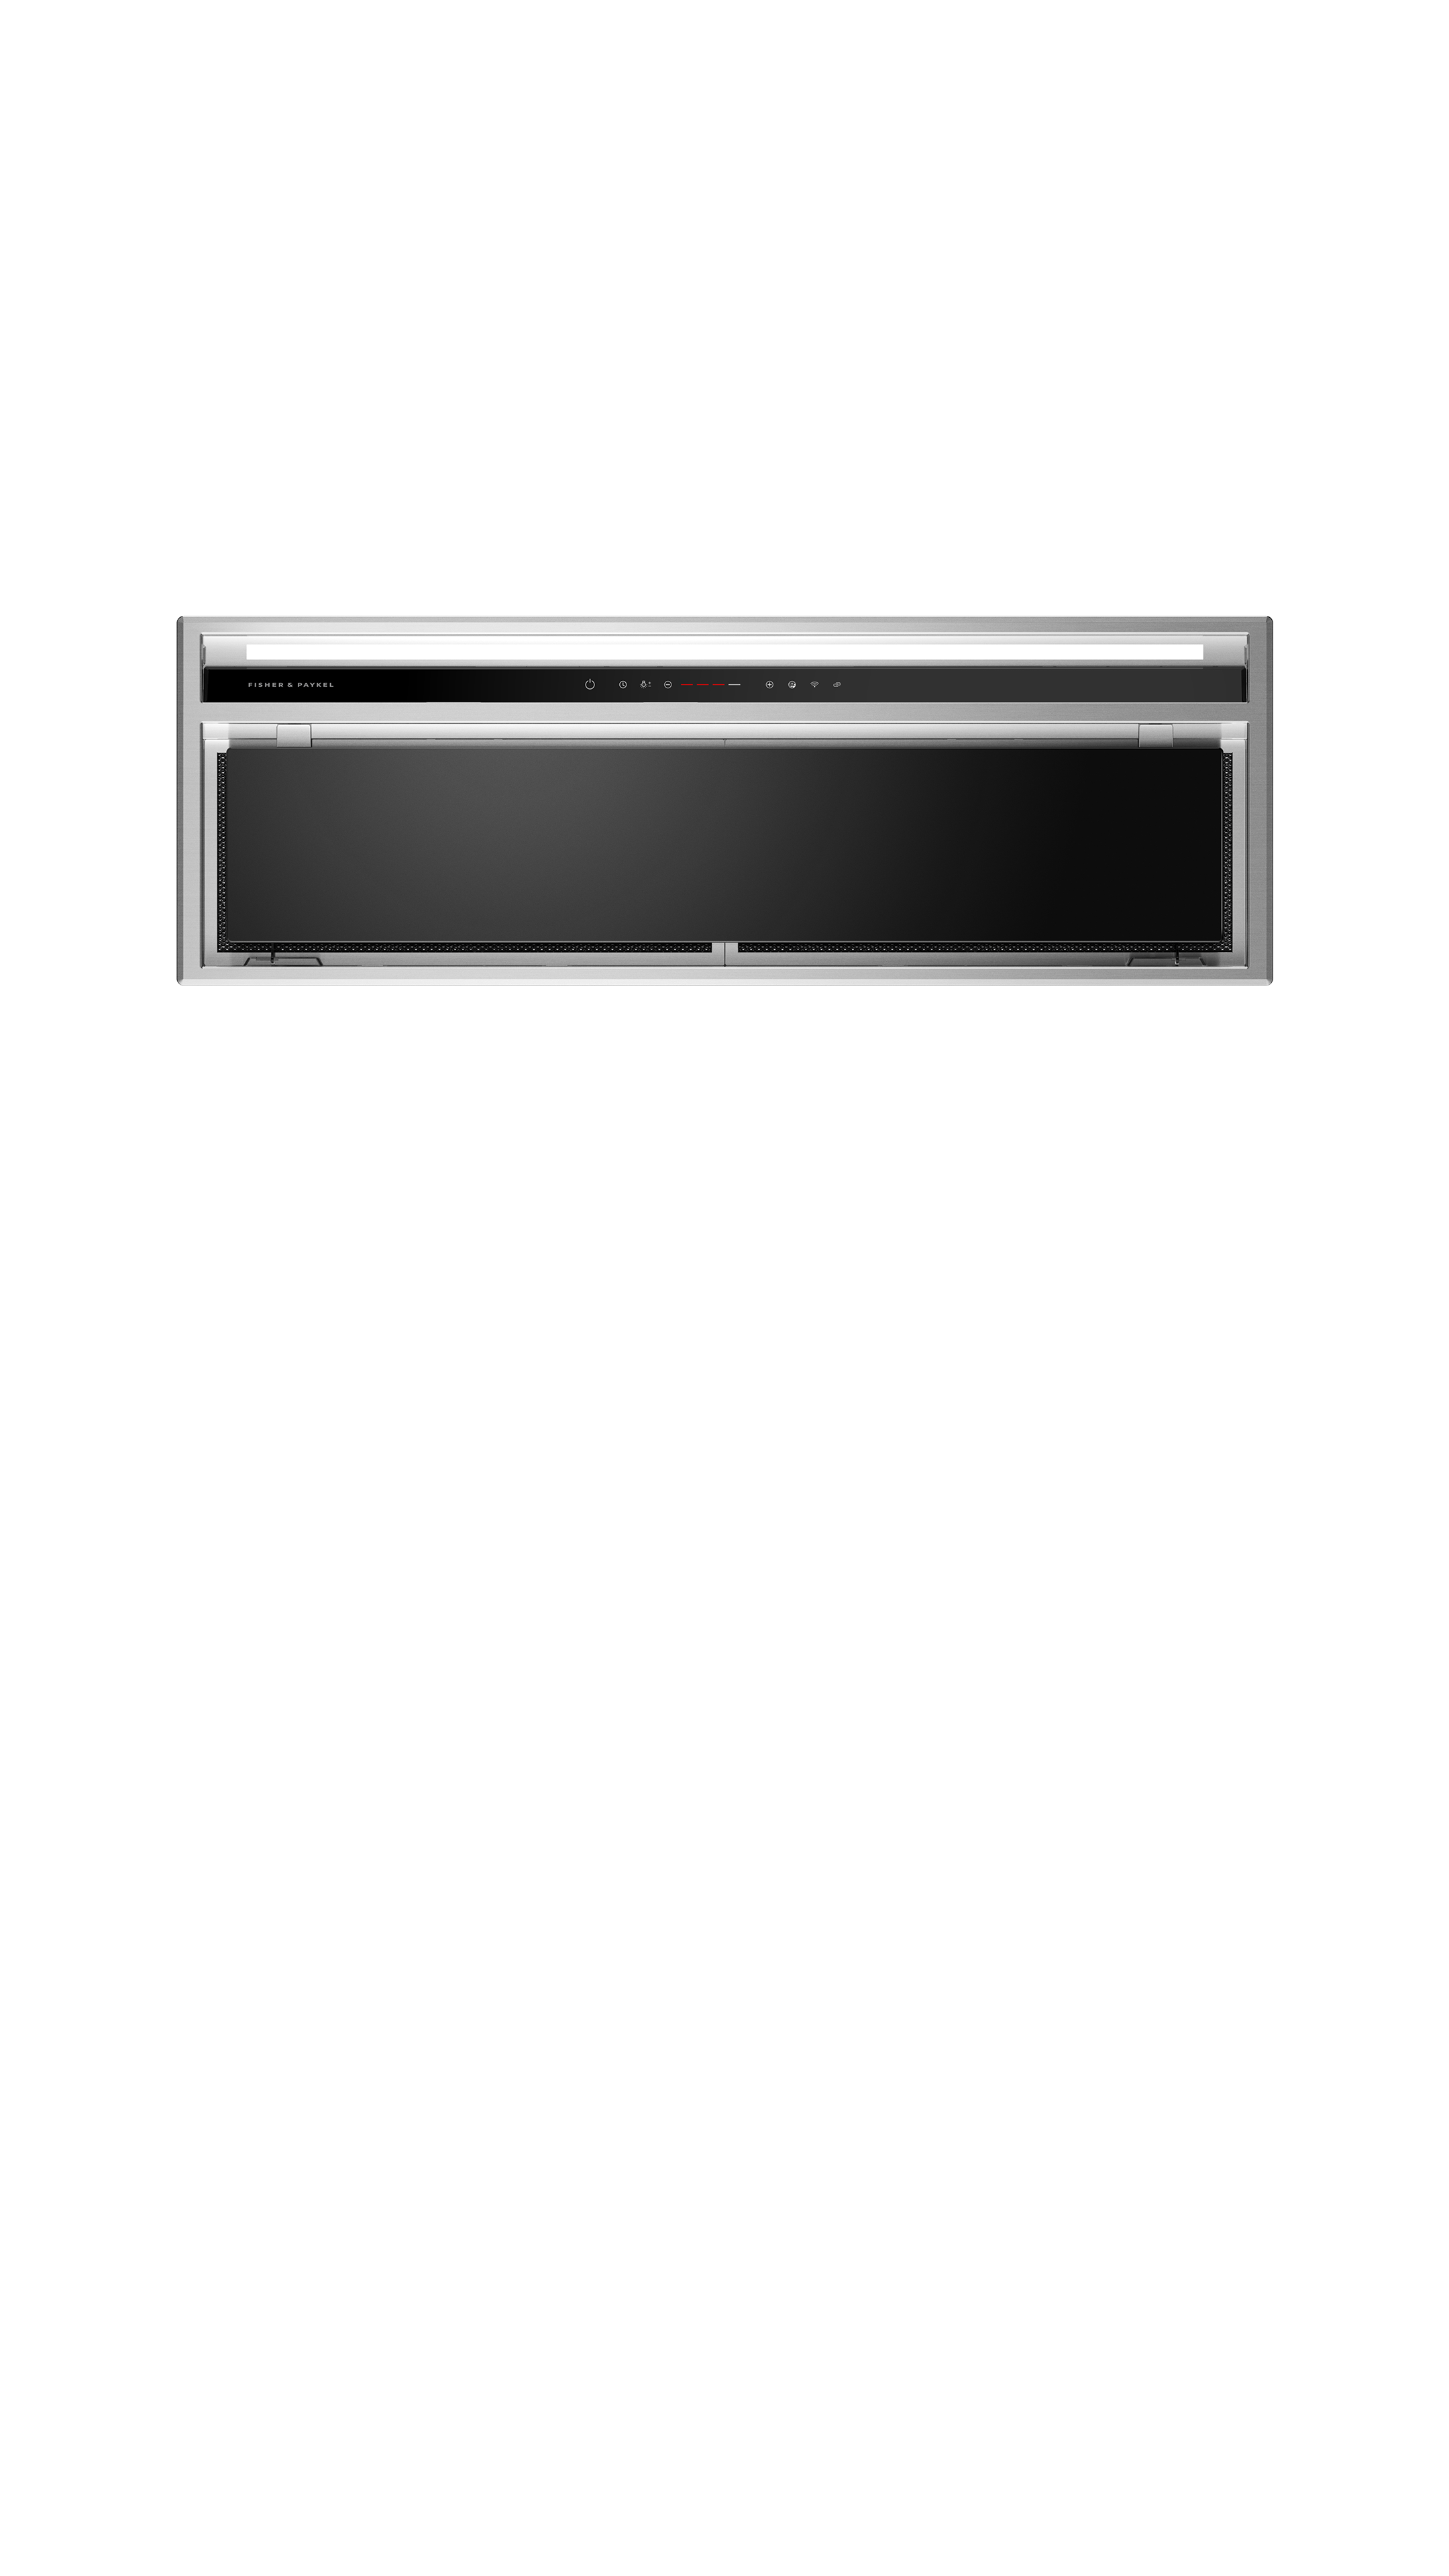 Fisher and Paykel Insert Range Hood, 36"